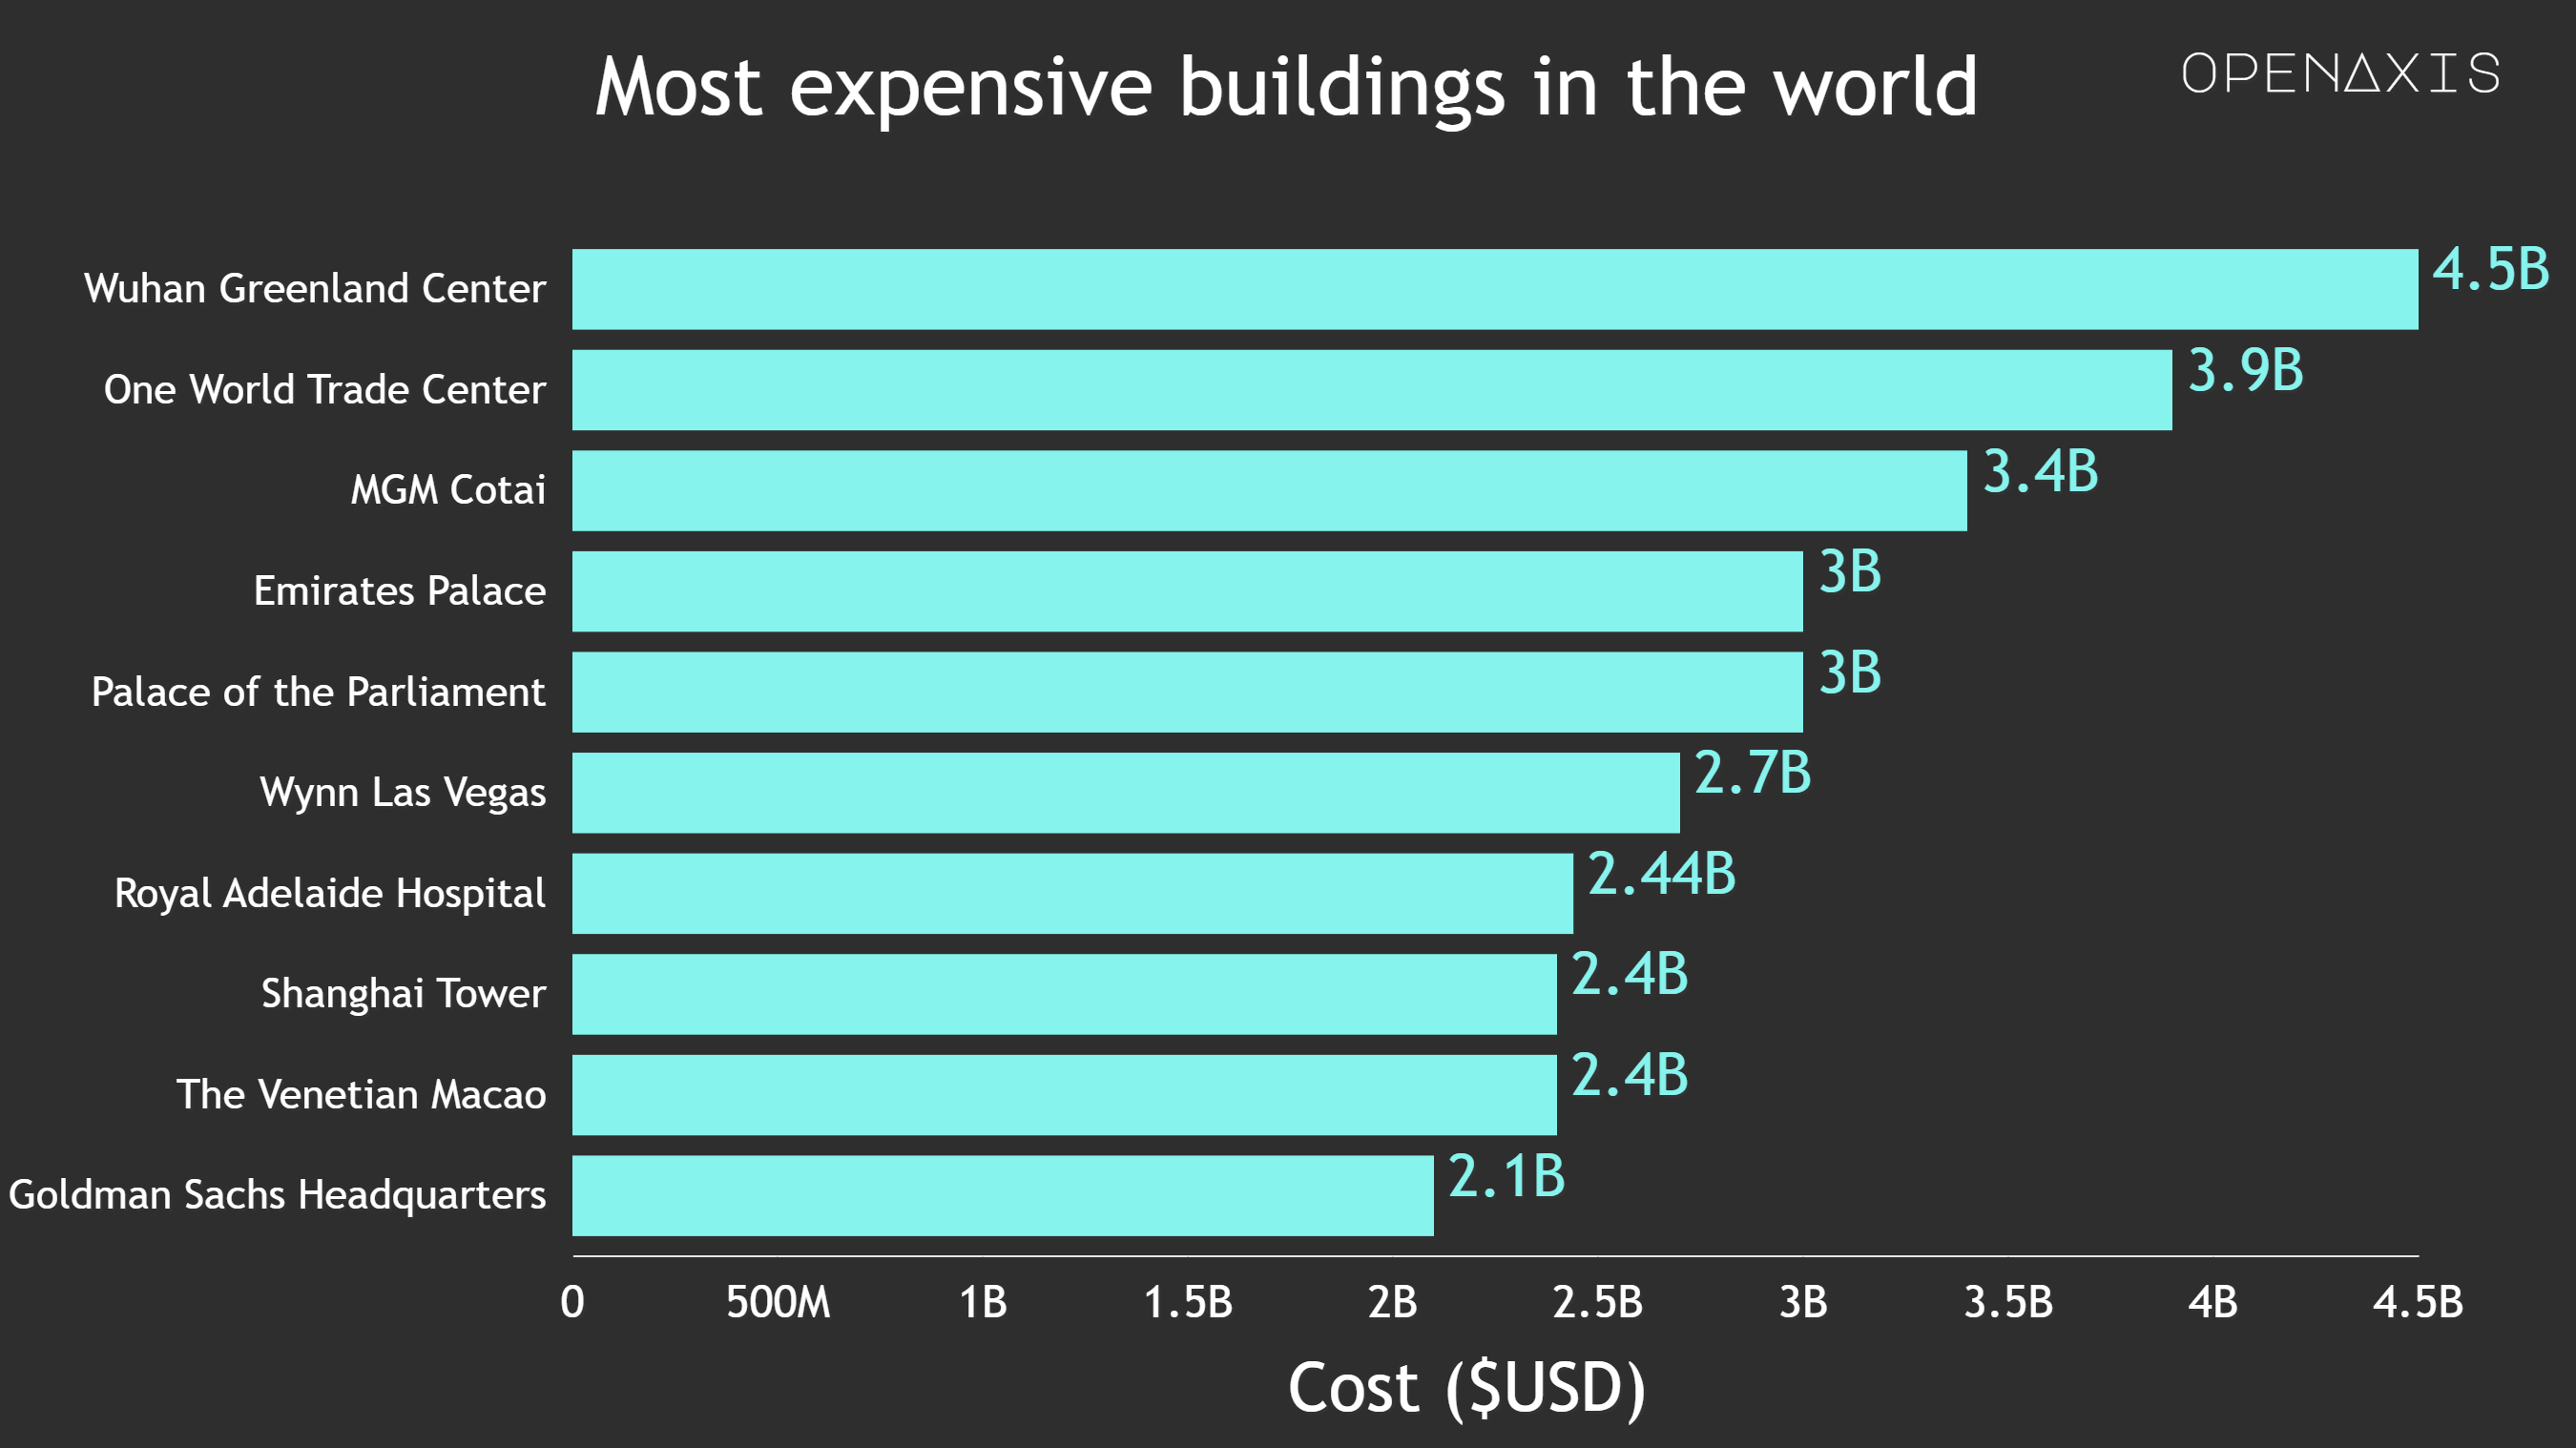 "Most expensive buildings in the world"